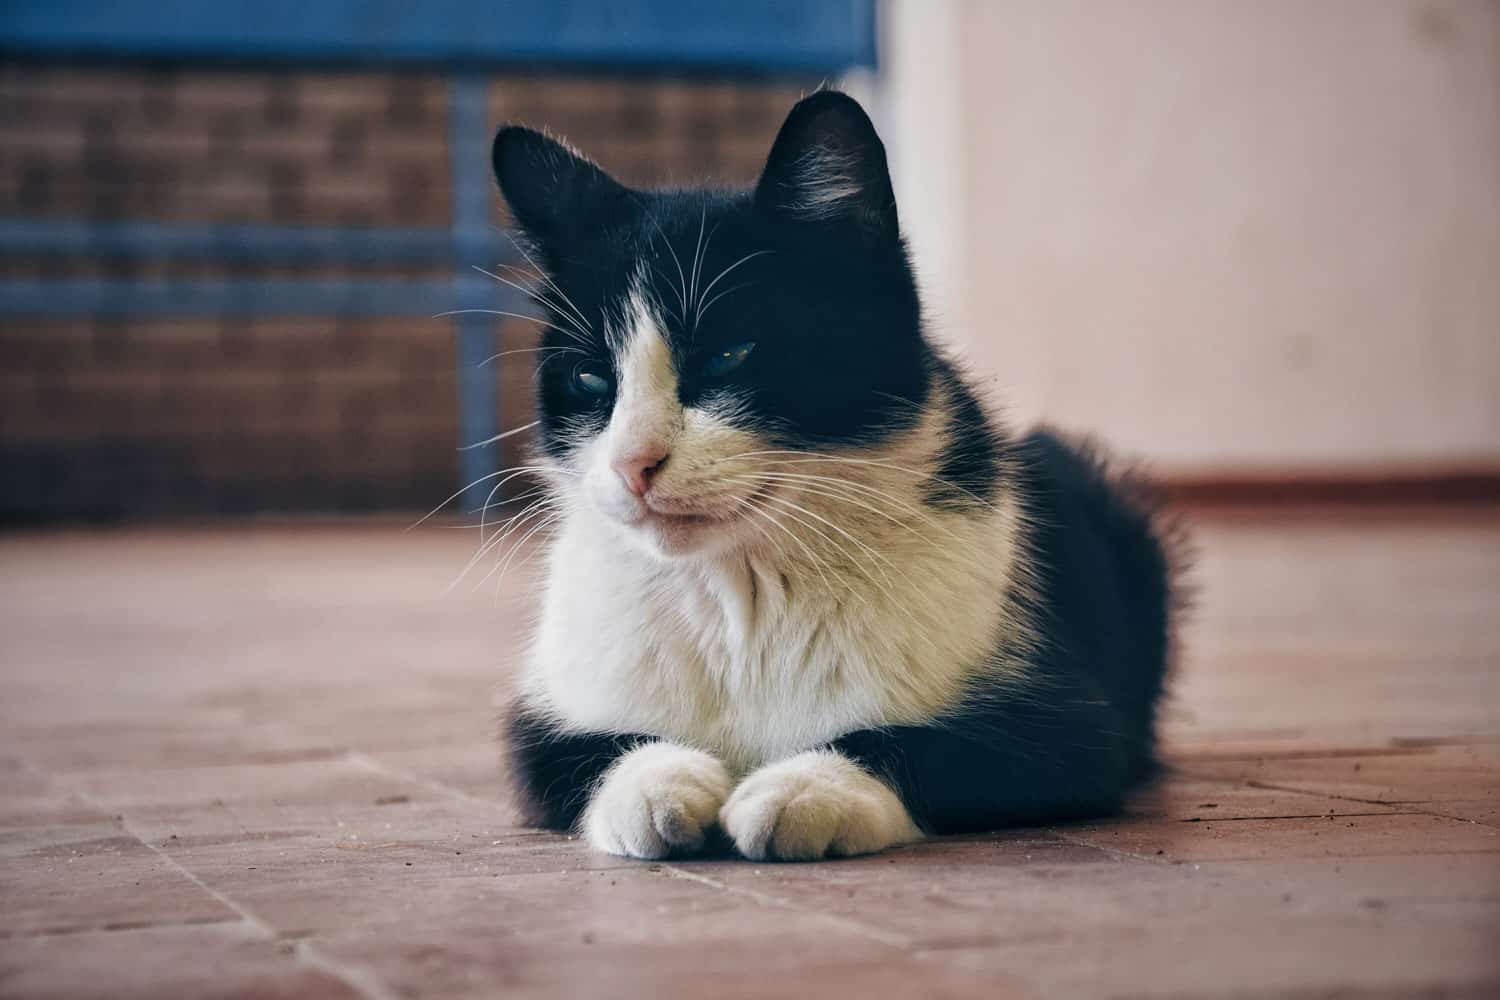 Black-and-white street cat with a strabismus of the eye.
